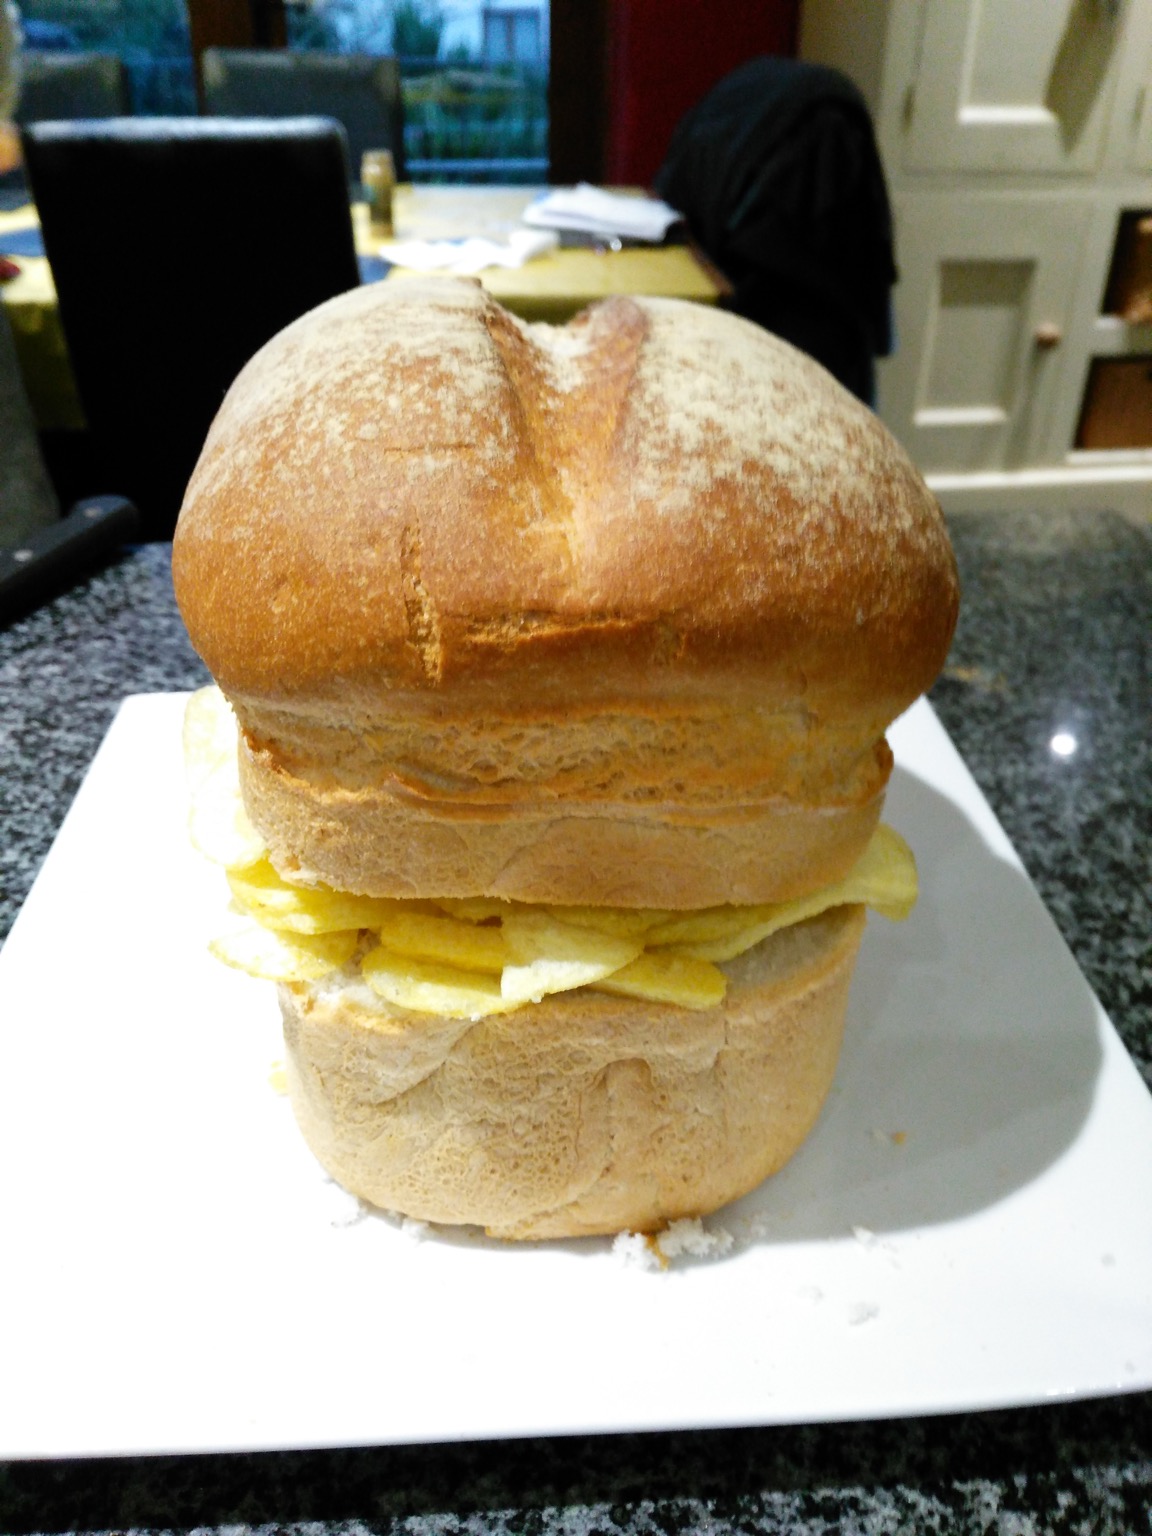 End view of loaf containing crisps and Chipsticks